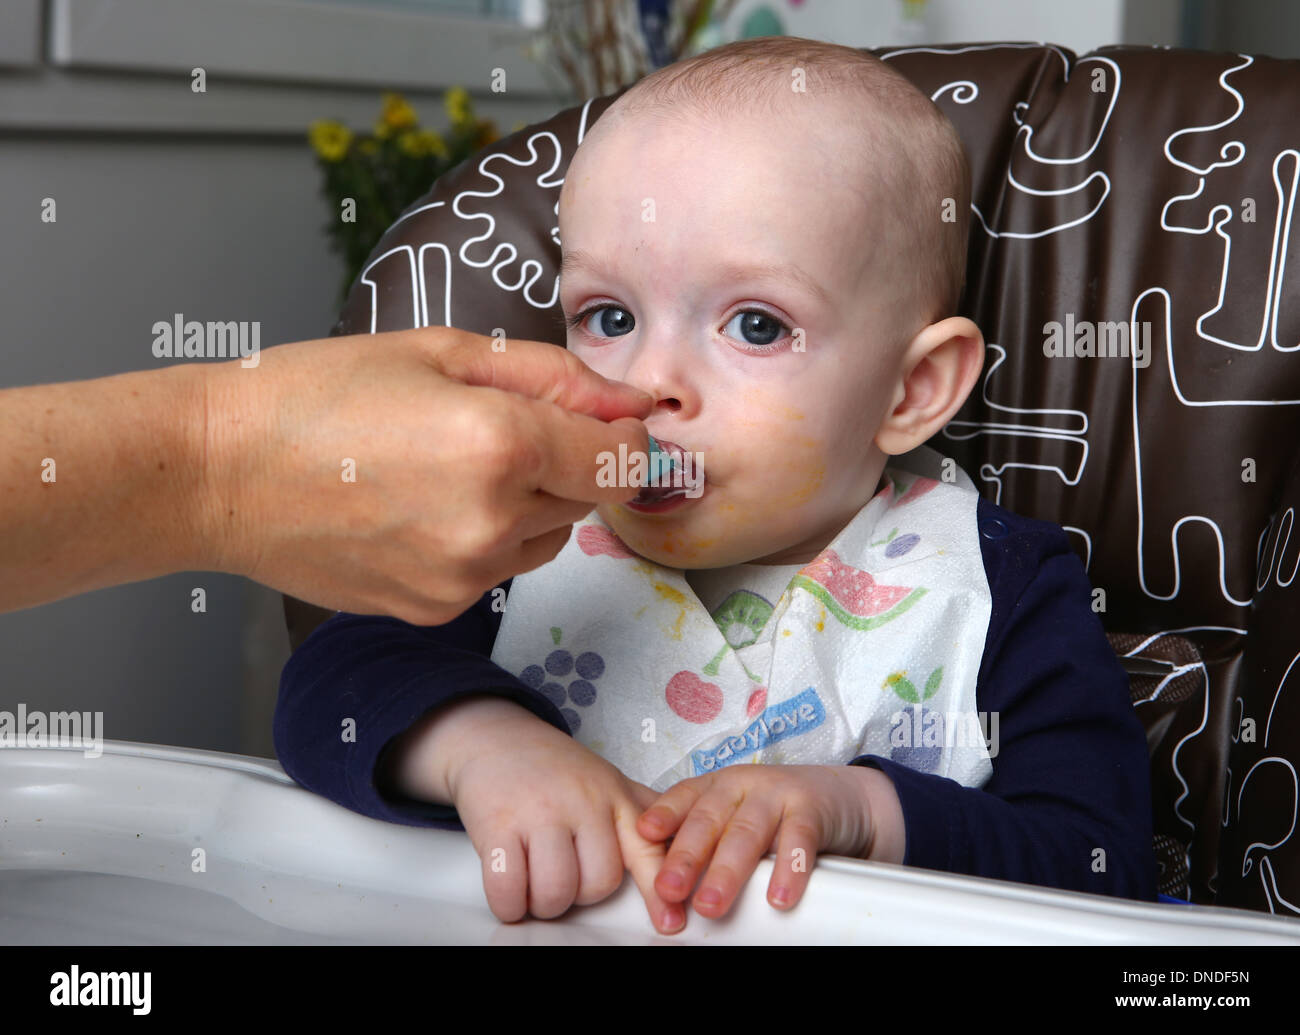 Boy, 9 months, being fed Stock Photo